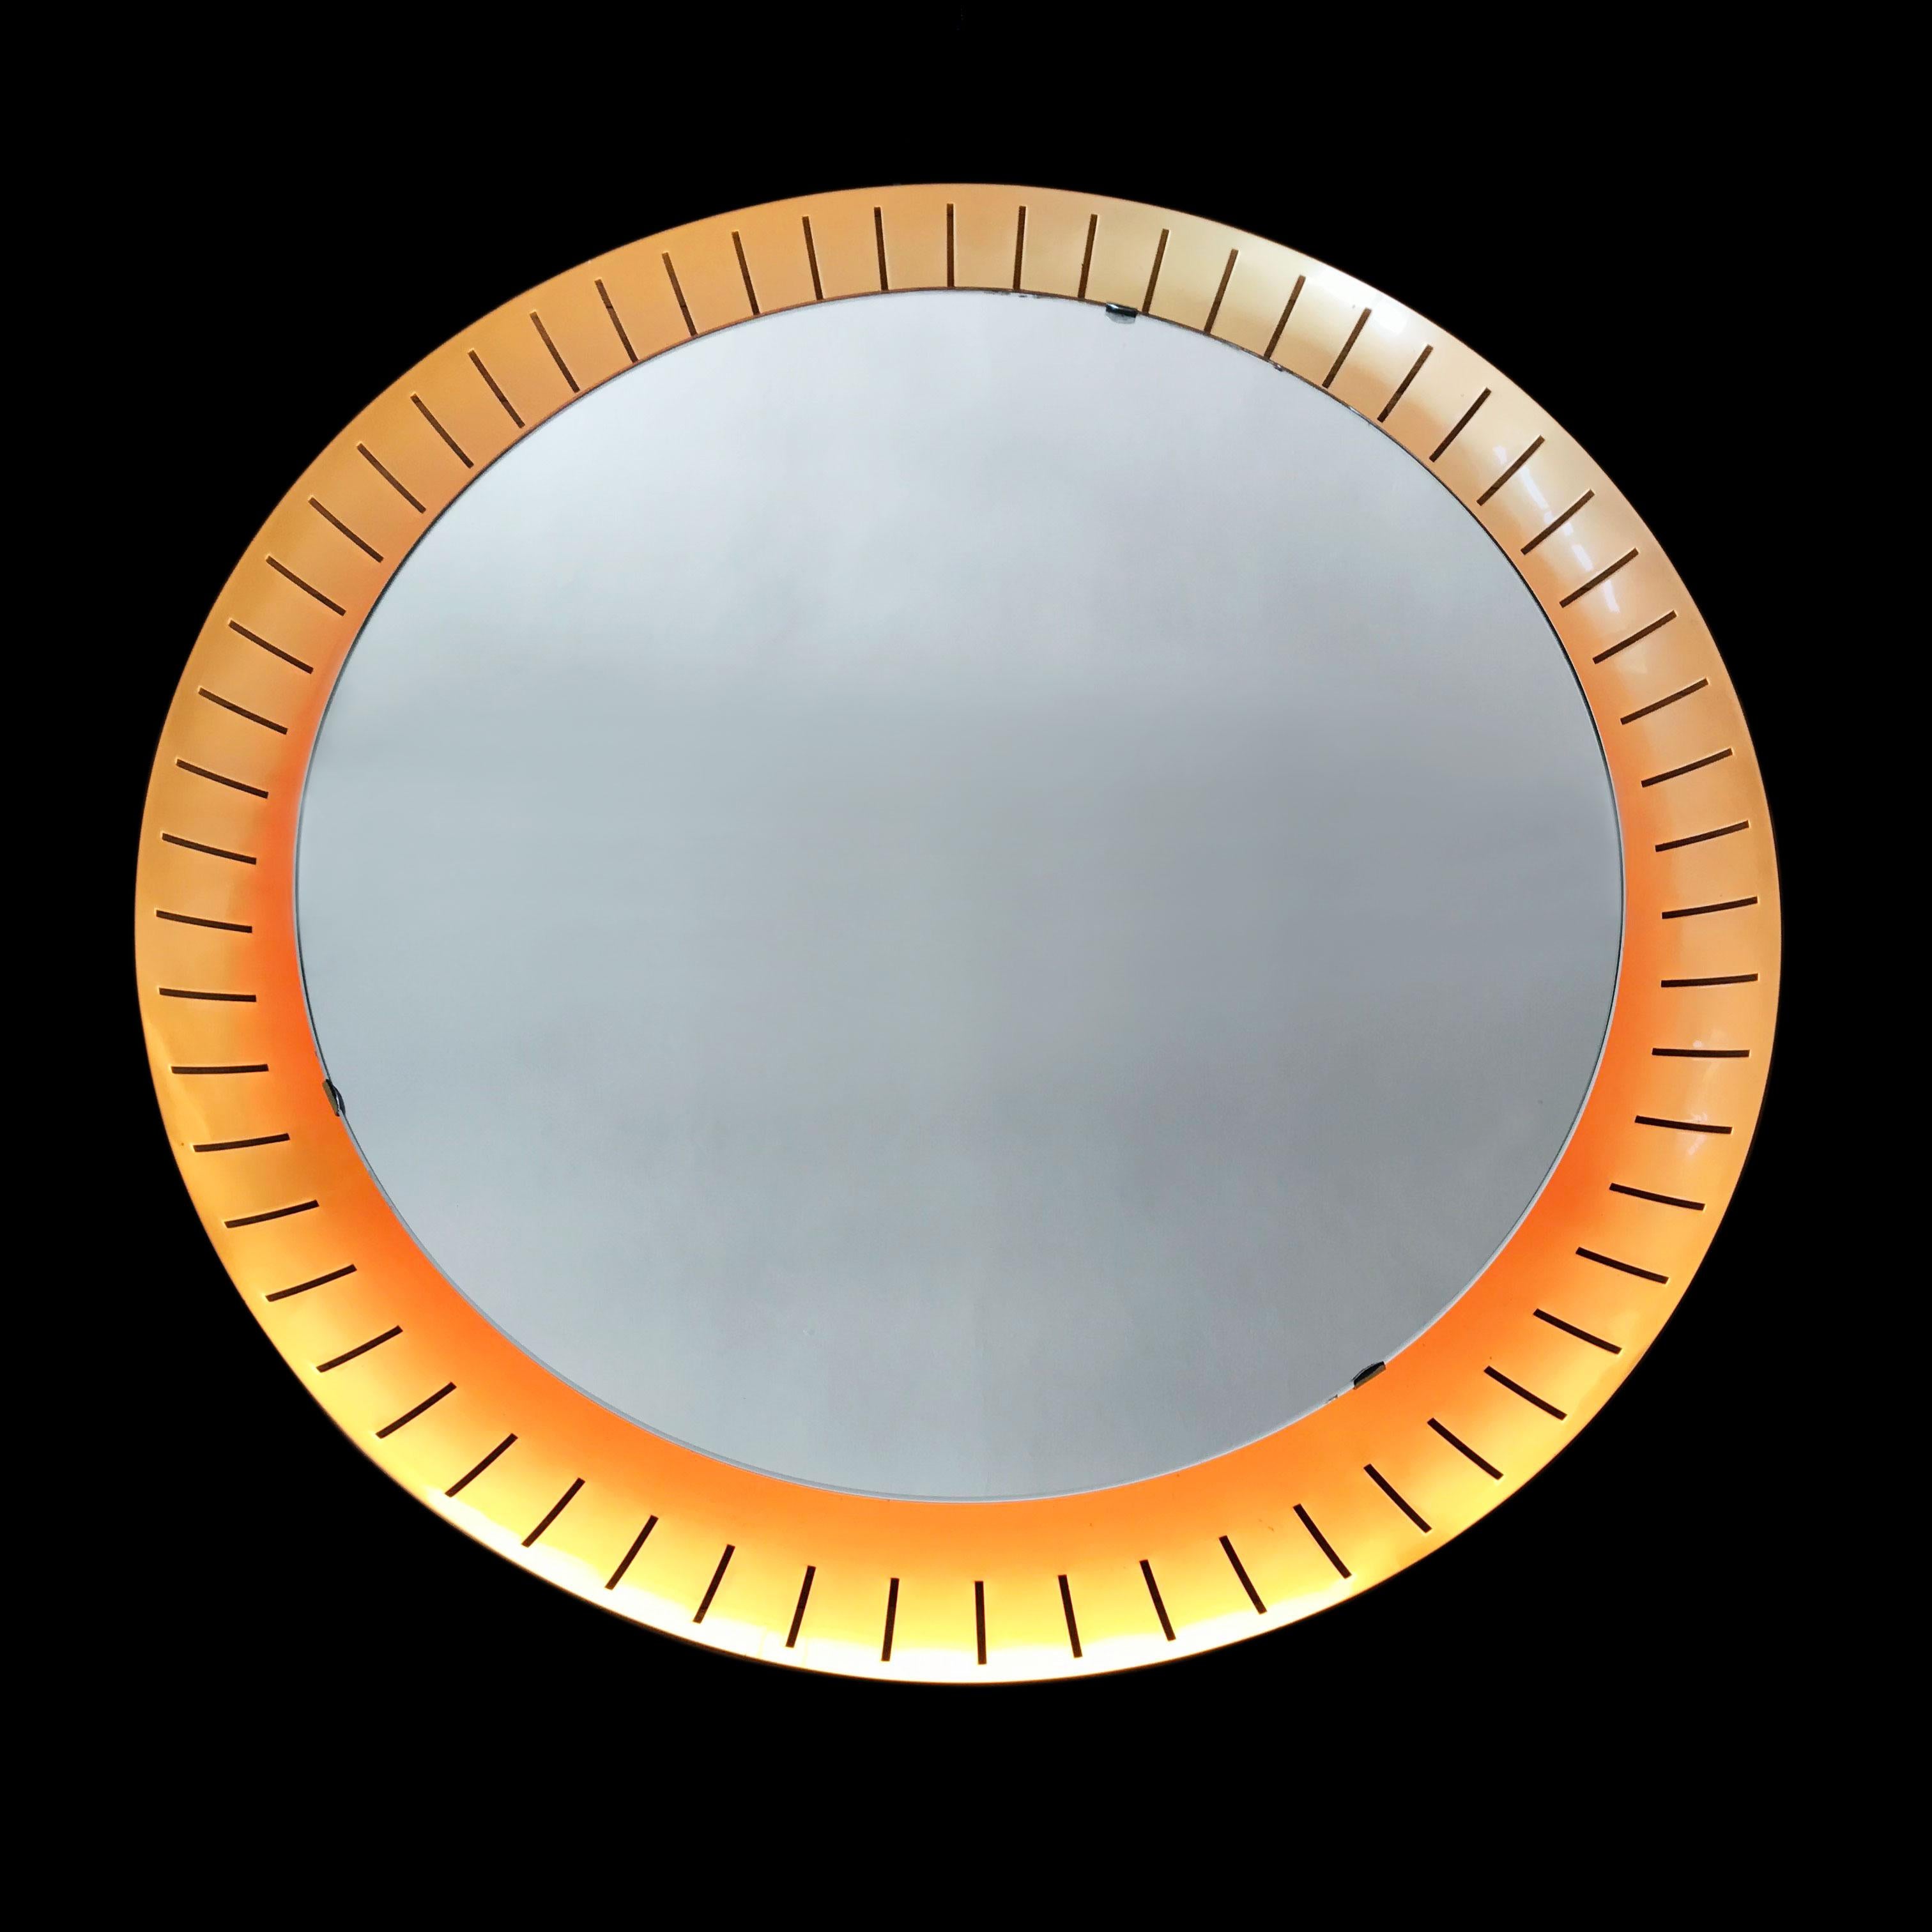 Aluminum Large Mid-Century Modern Backlit Wall Mirror by Hillebrand, 1950s, Germany For Sale